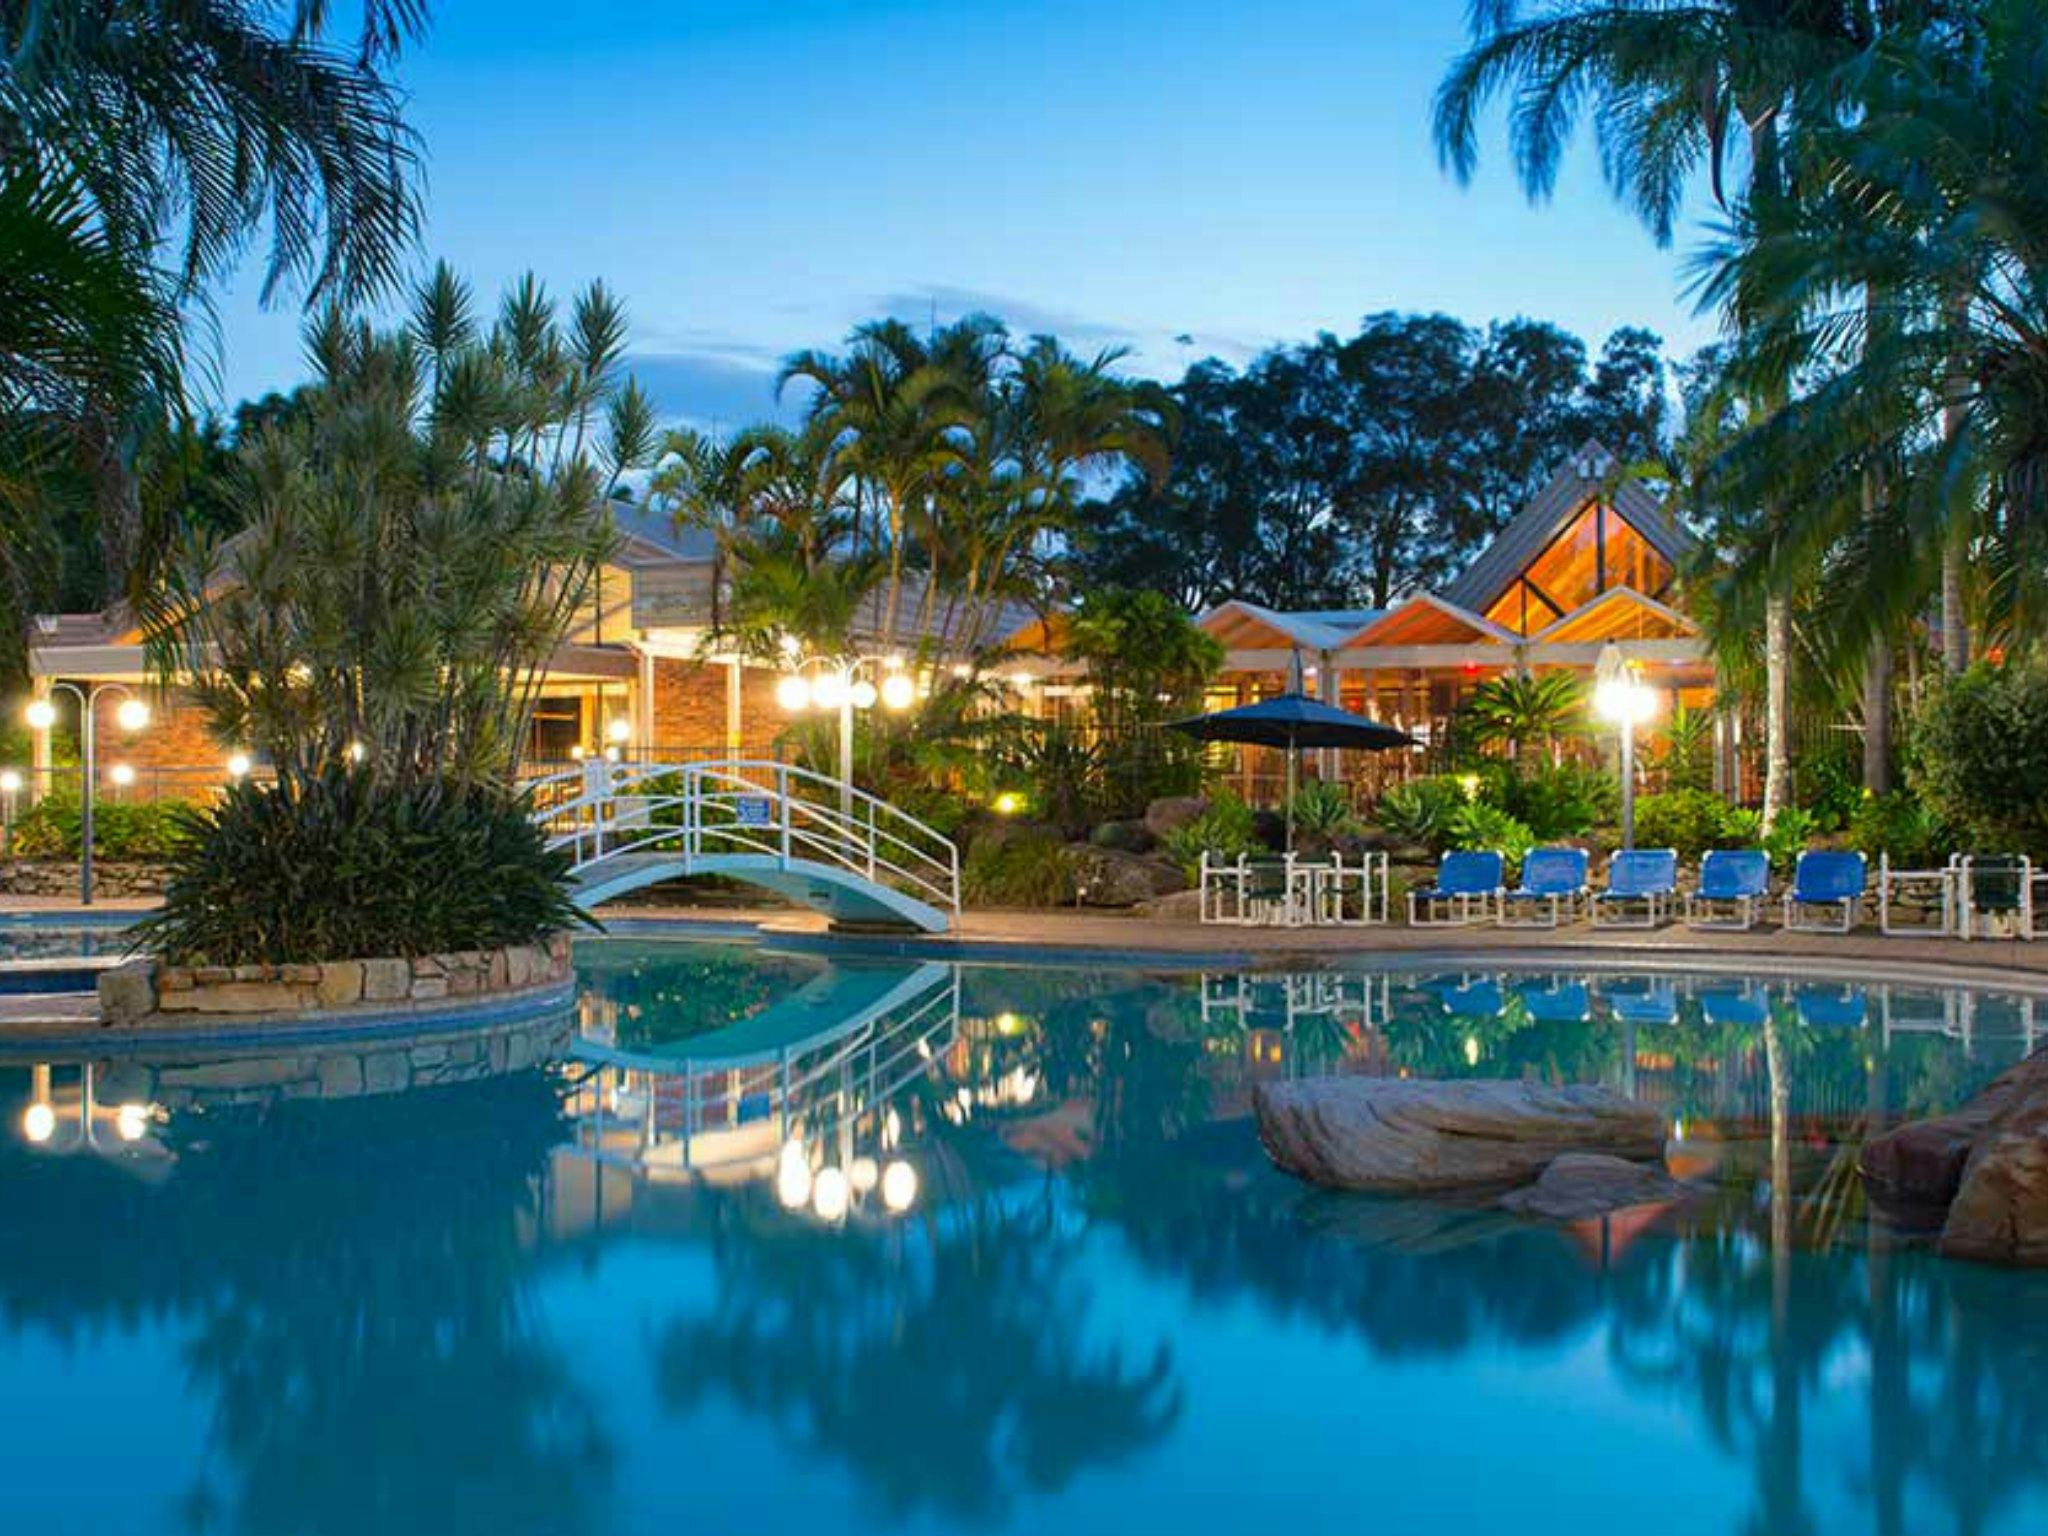 Boambee Bay Resort Nsw Holidays And Accommodation Things To Do Attractions And Events